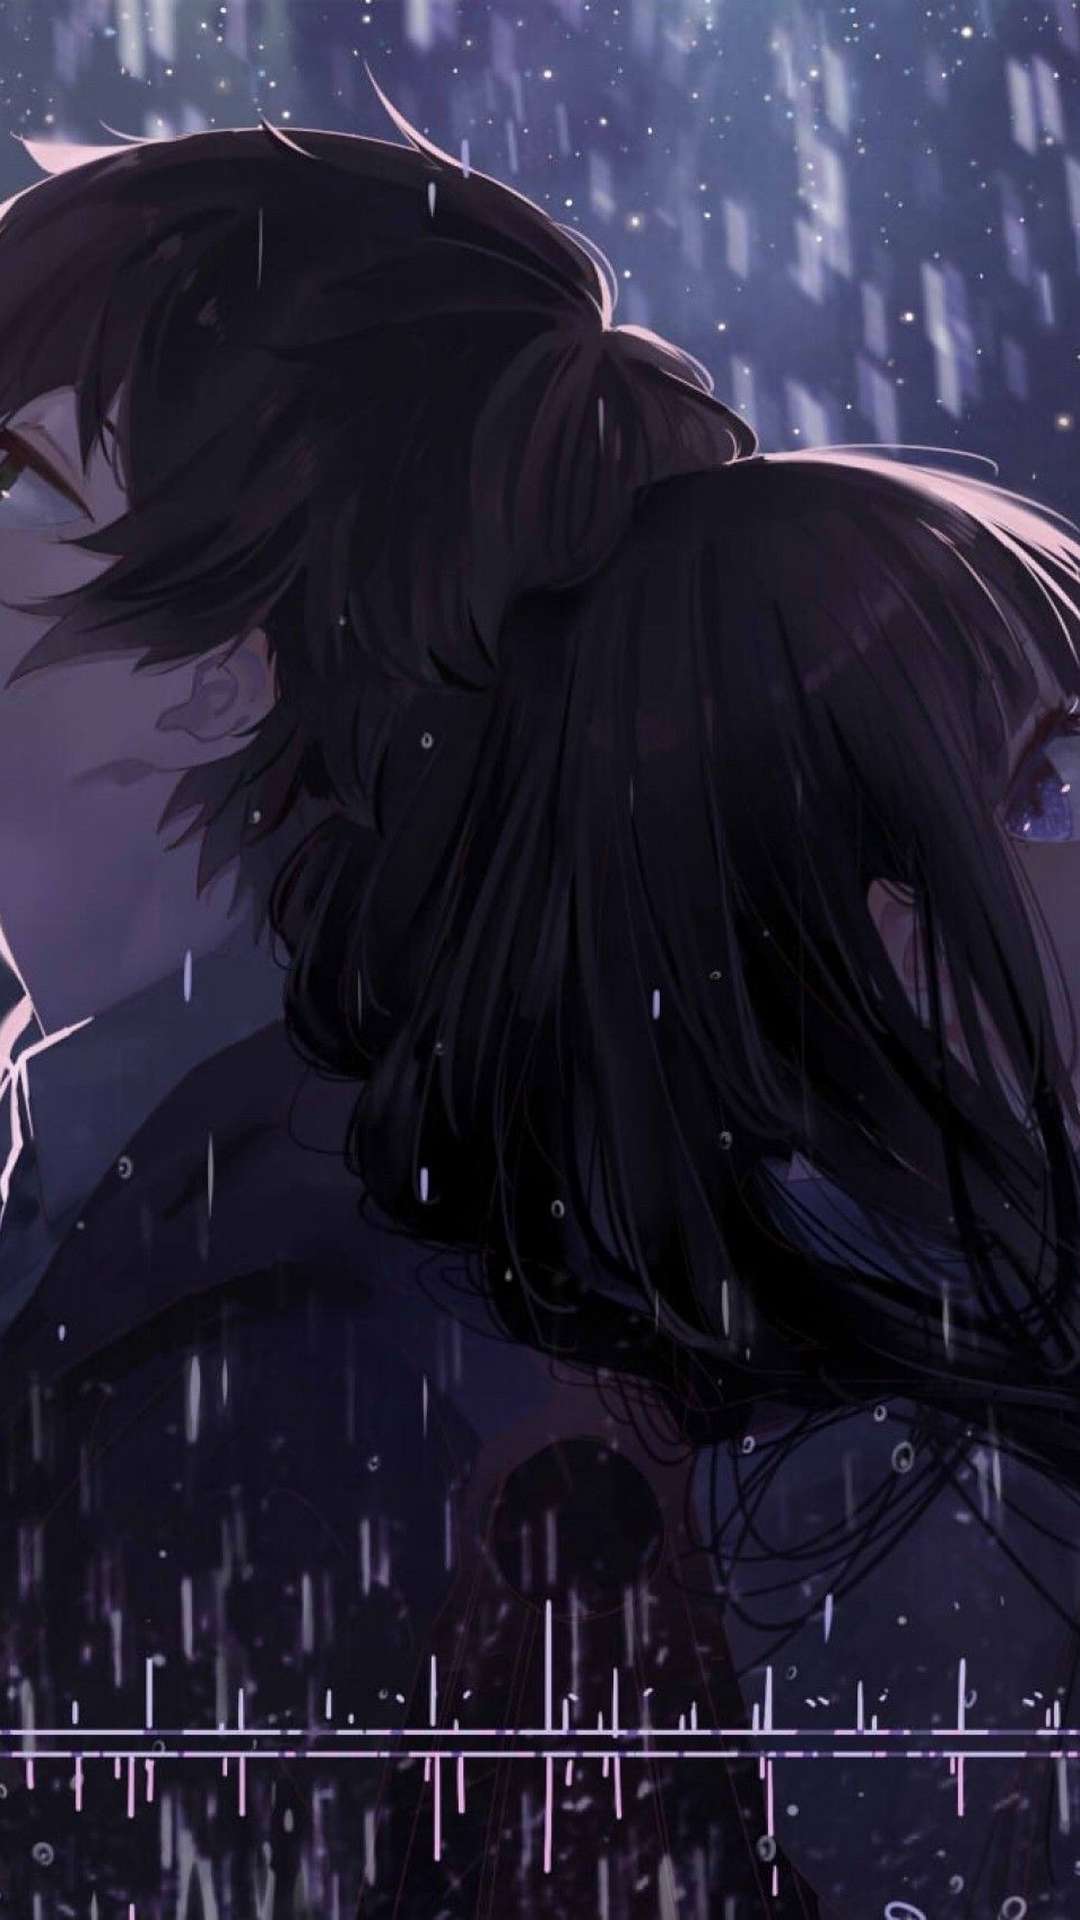 149 Anime Couple Wallpapers for iPhone and Android by Sheryl Meyers